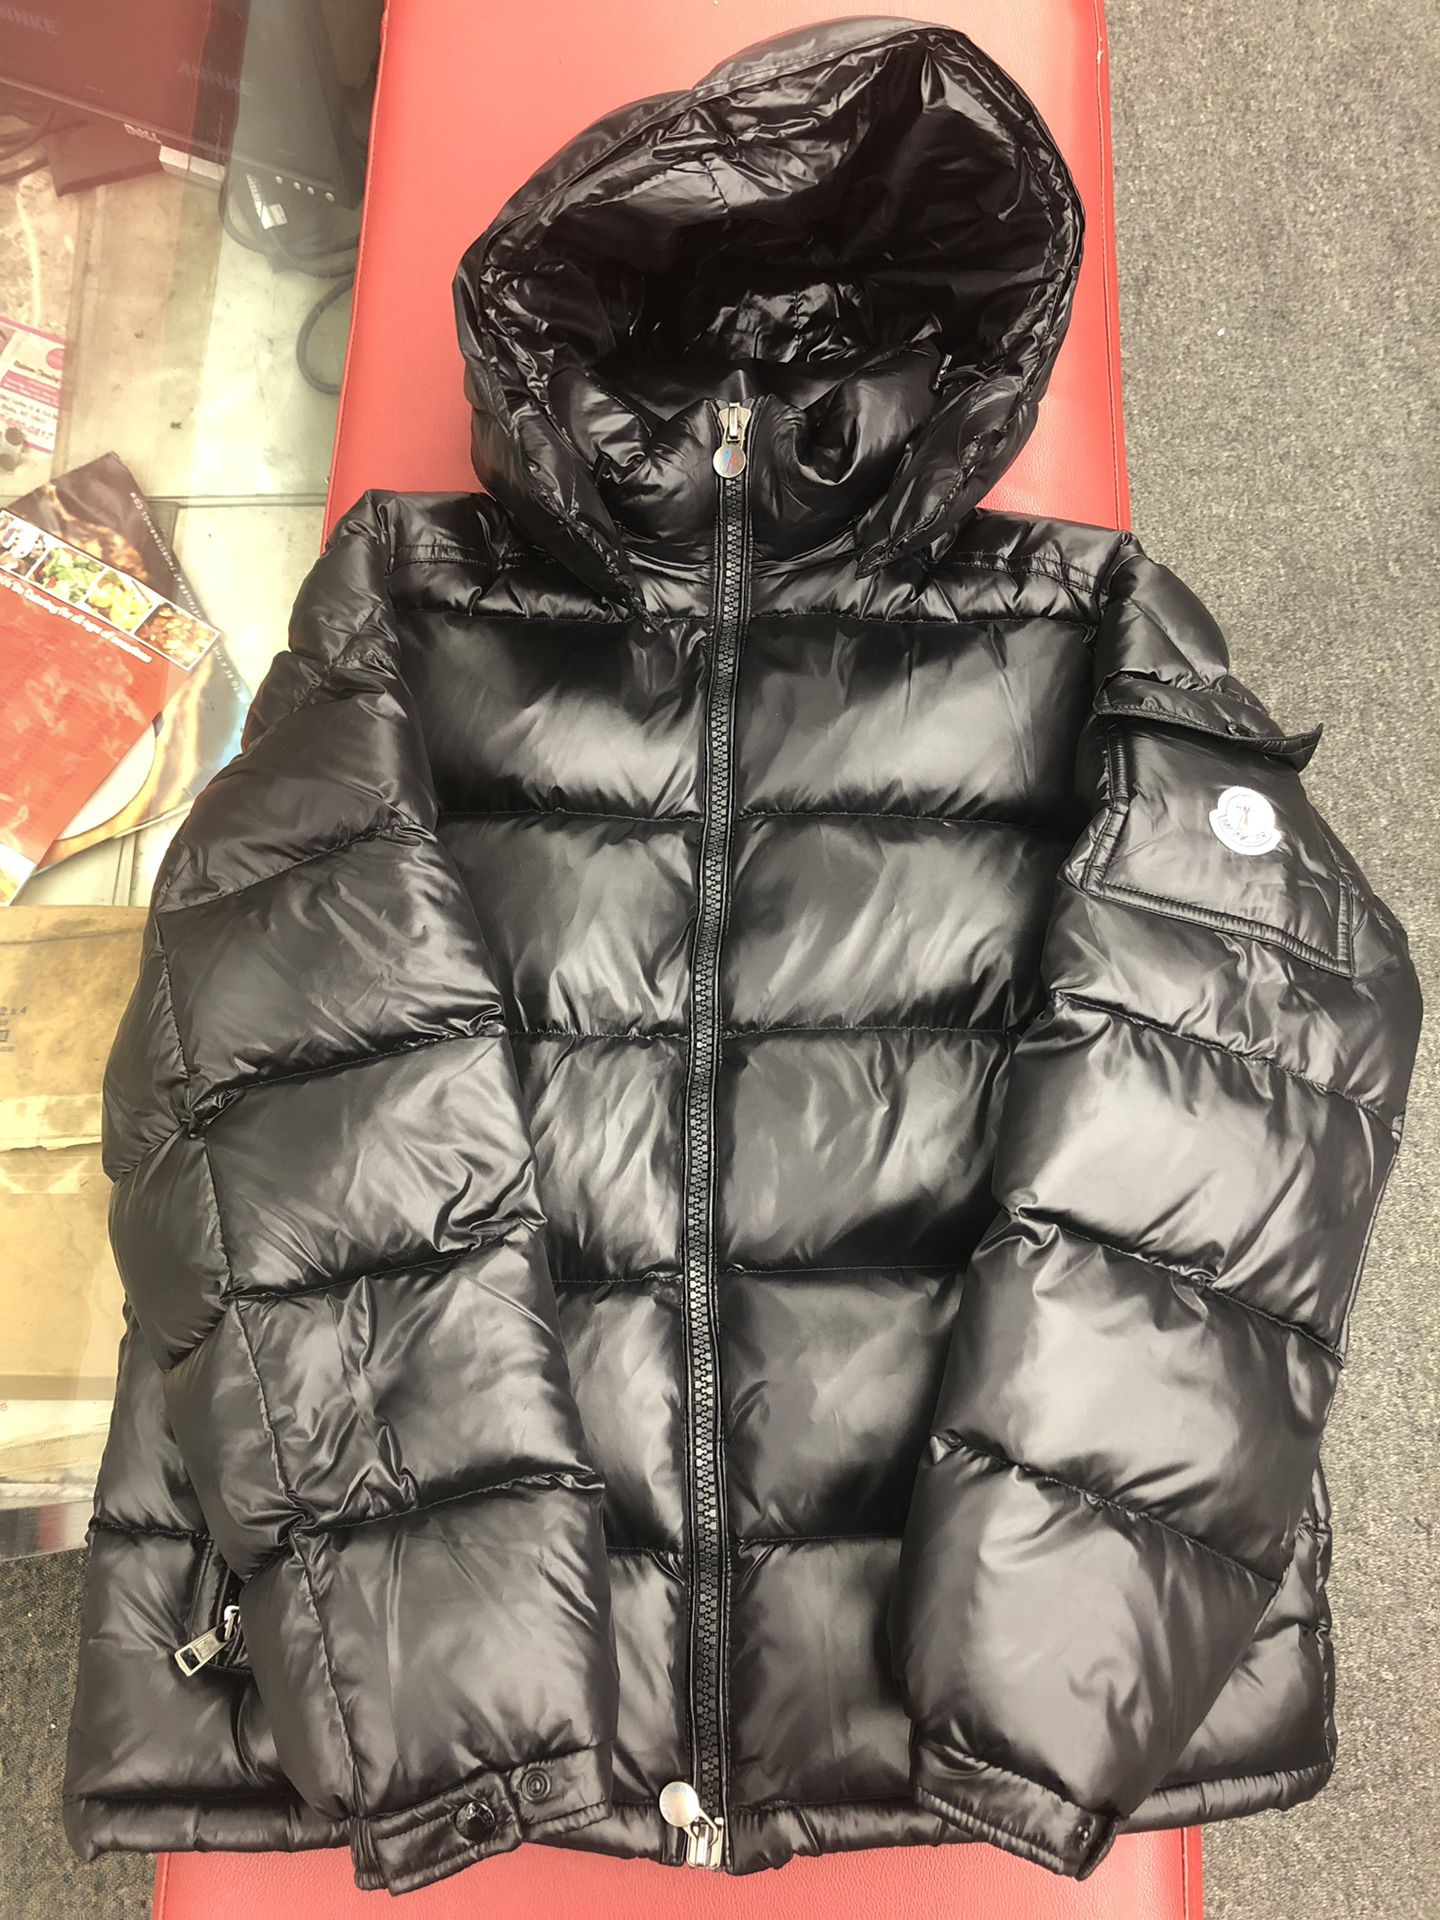 Moncler, size 5 (Fits as slim fit XL and normal L)